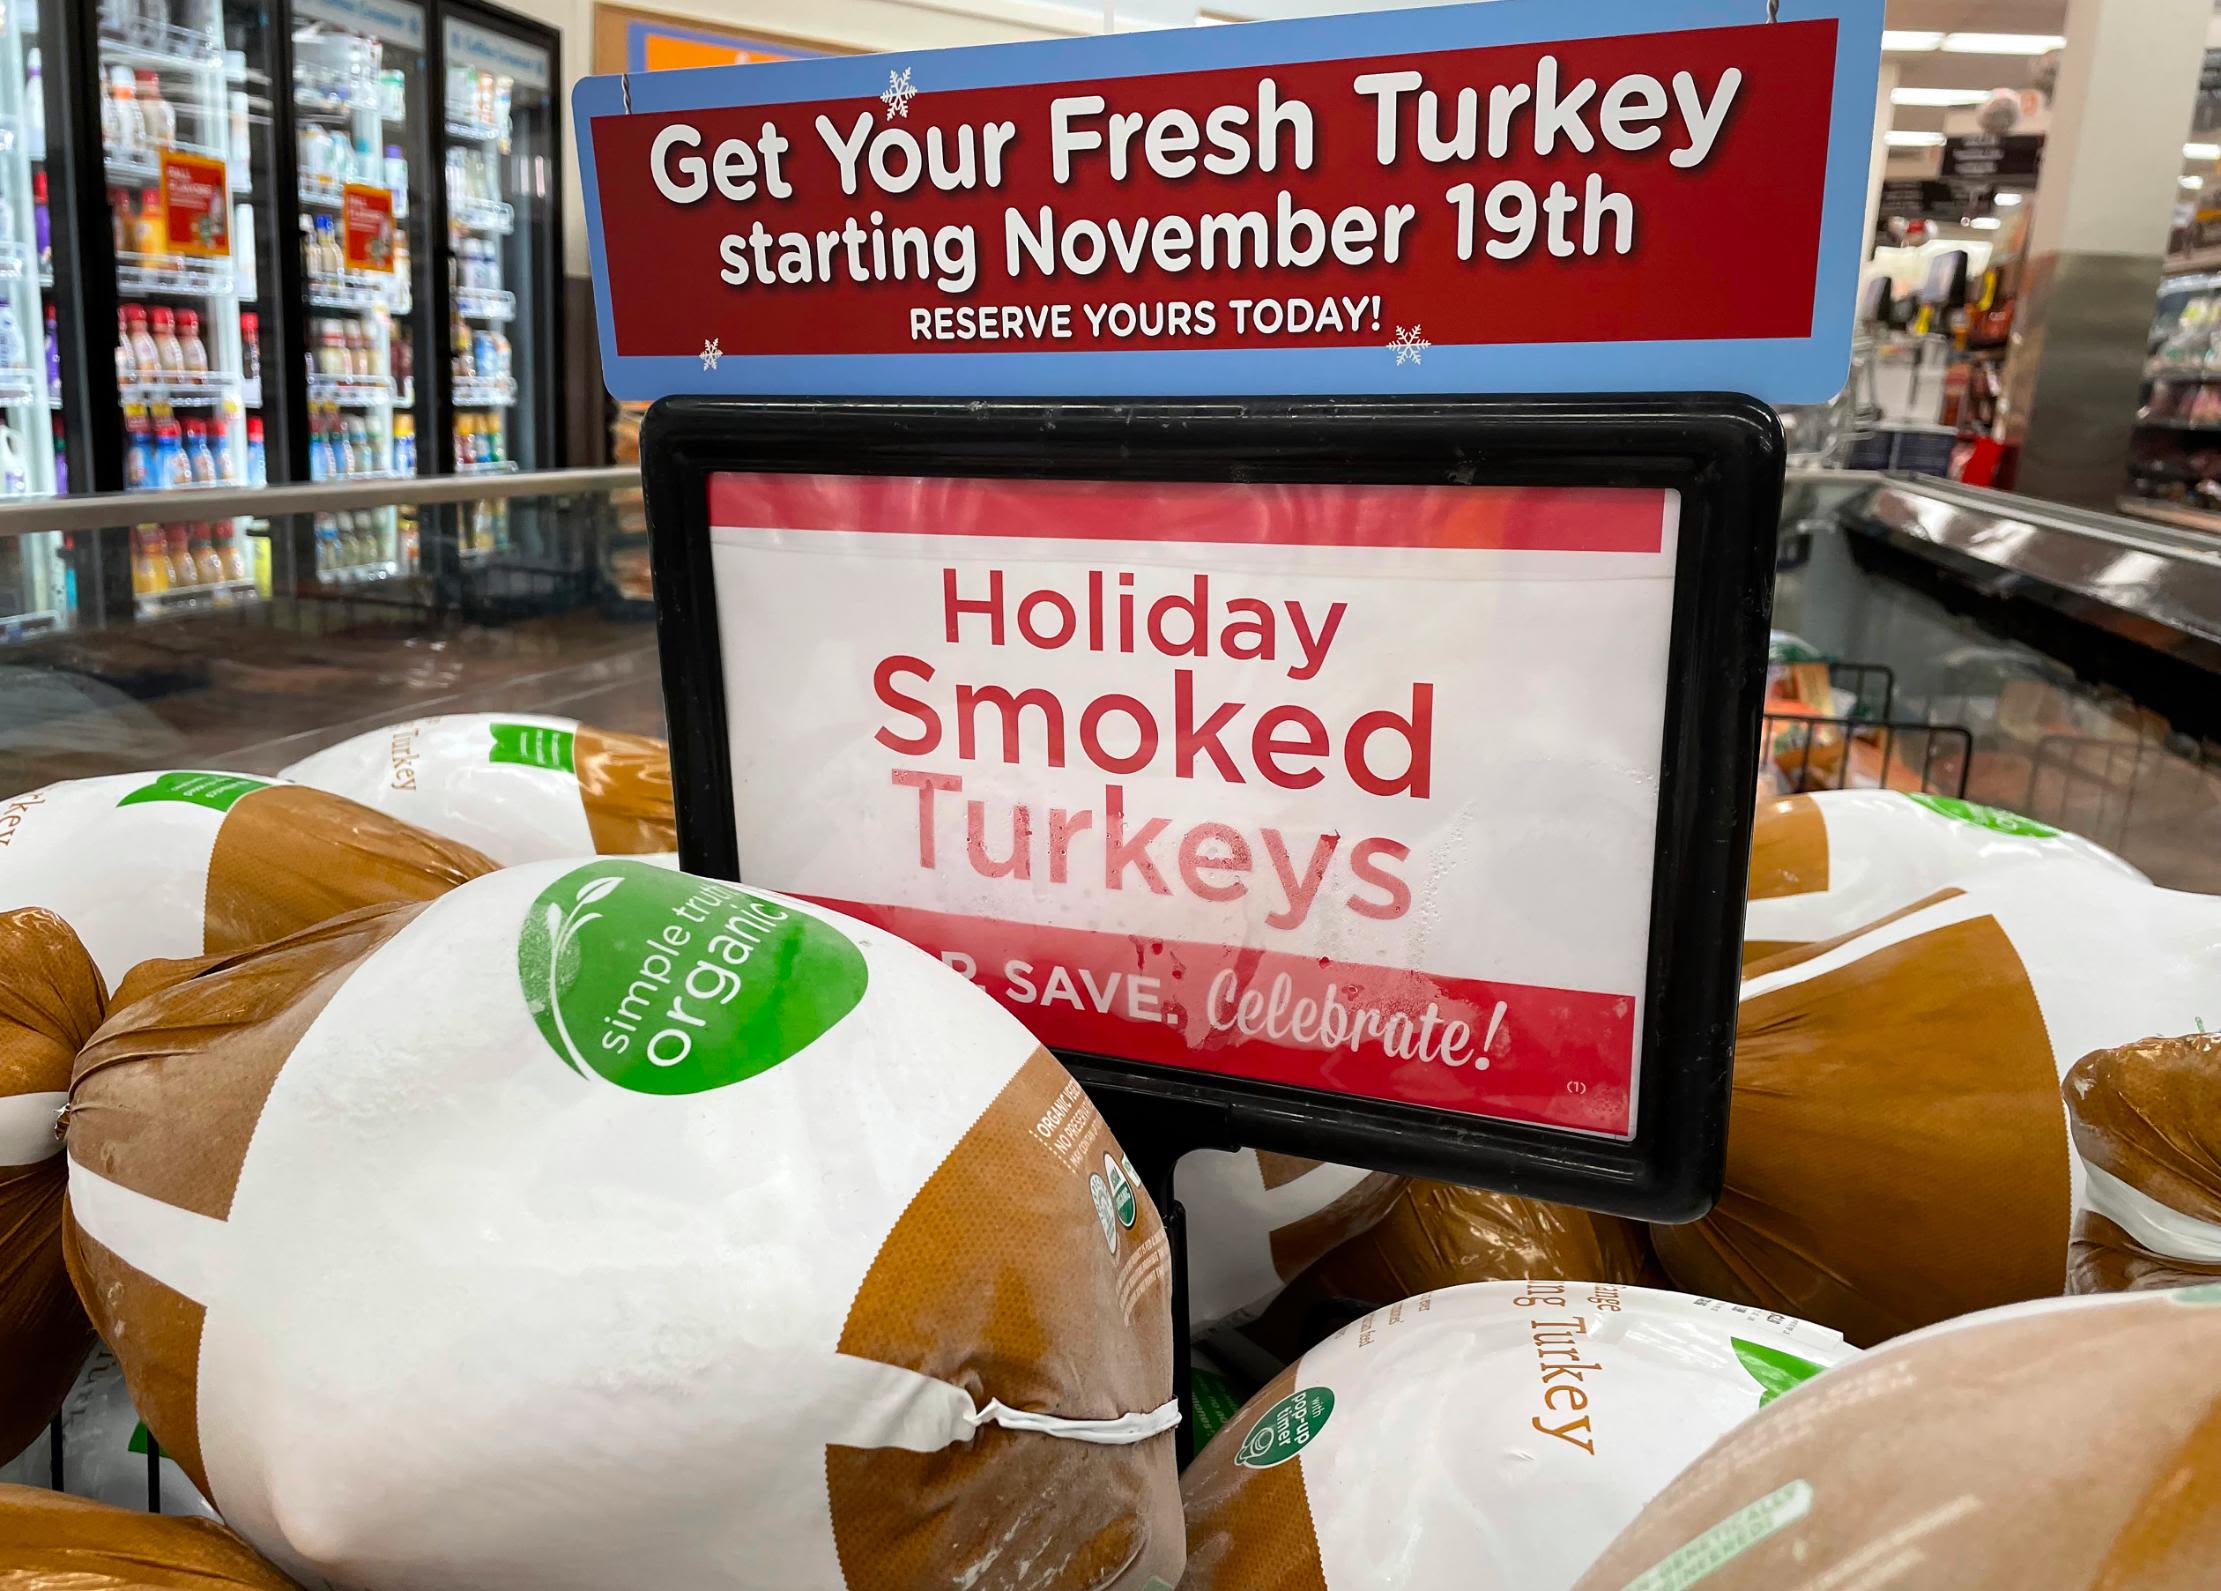 Nearly 100 popular retailers will be closed on Thanksgiving Day